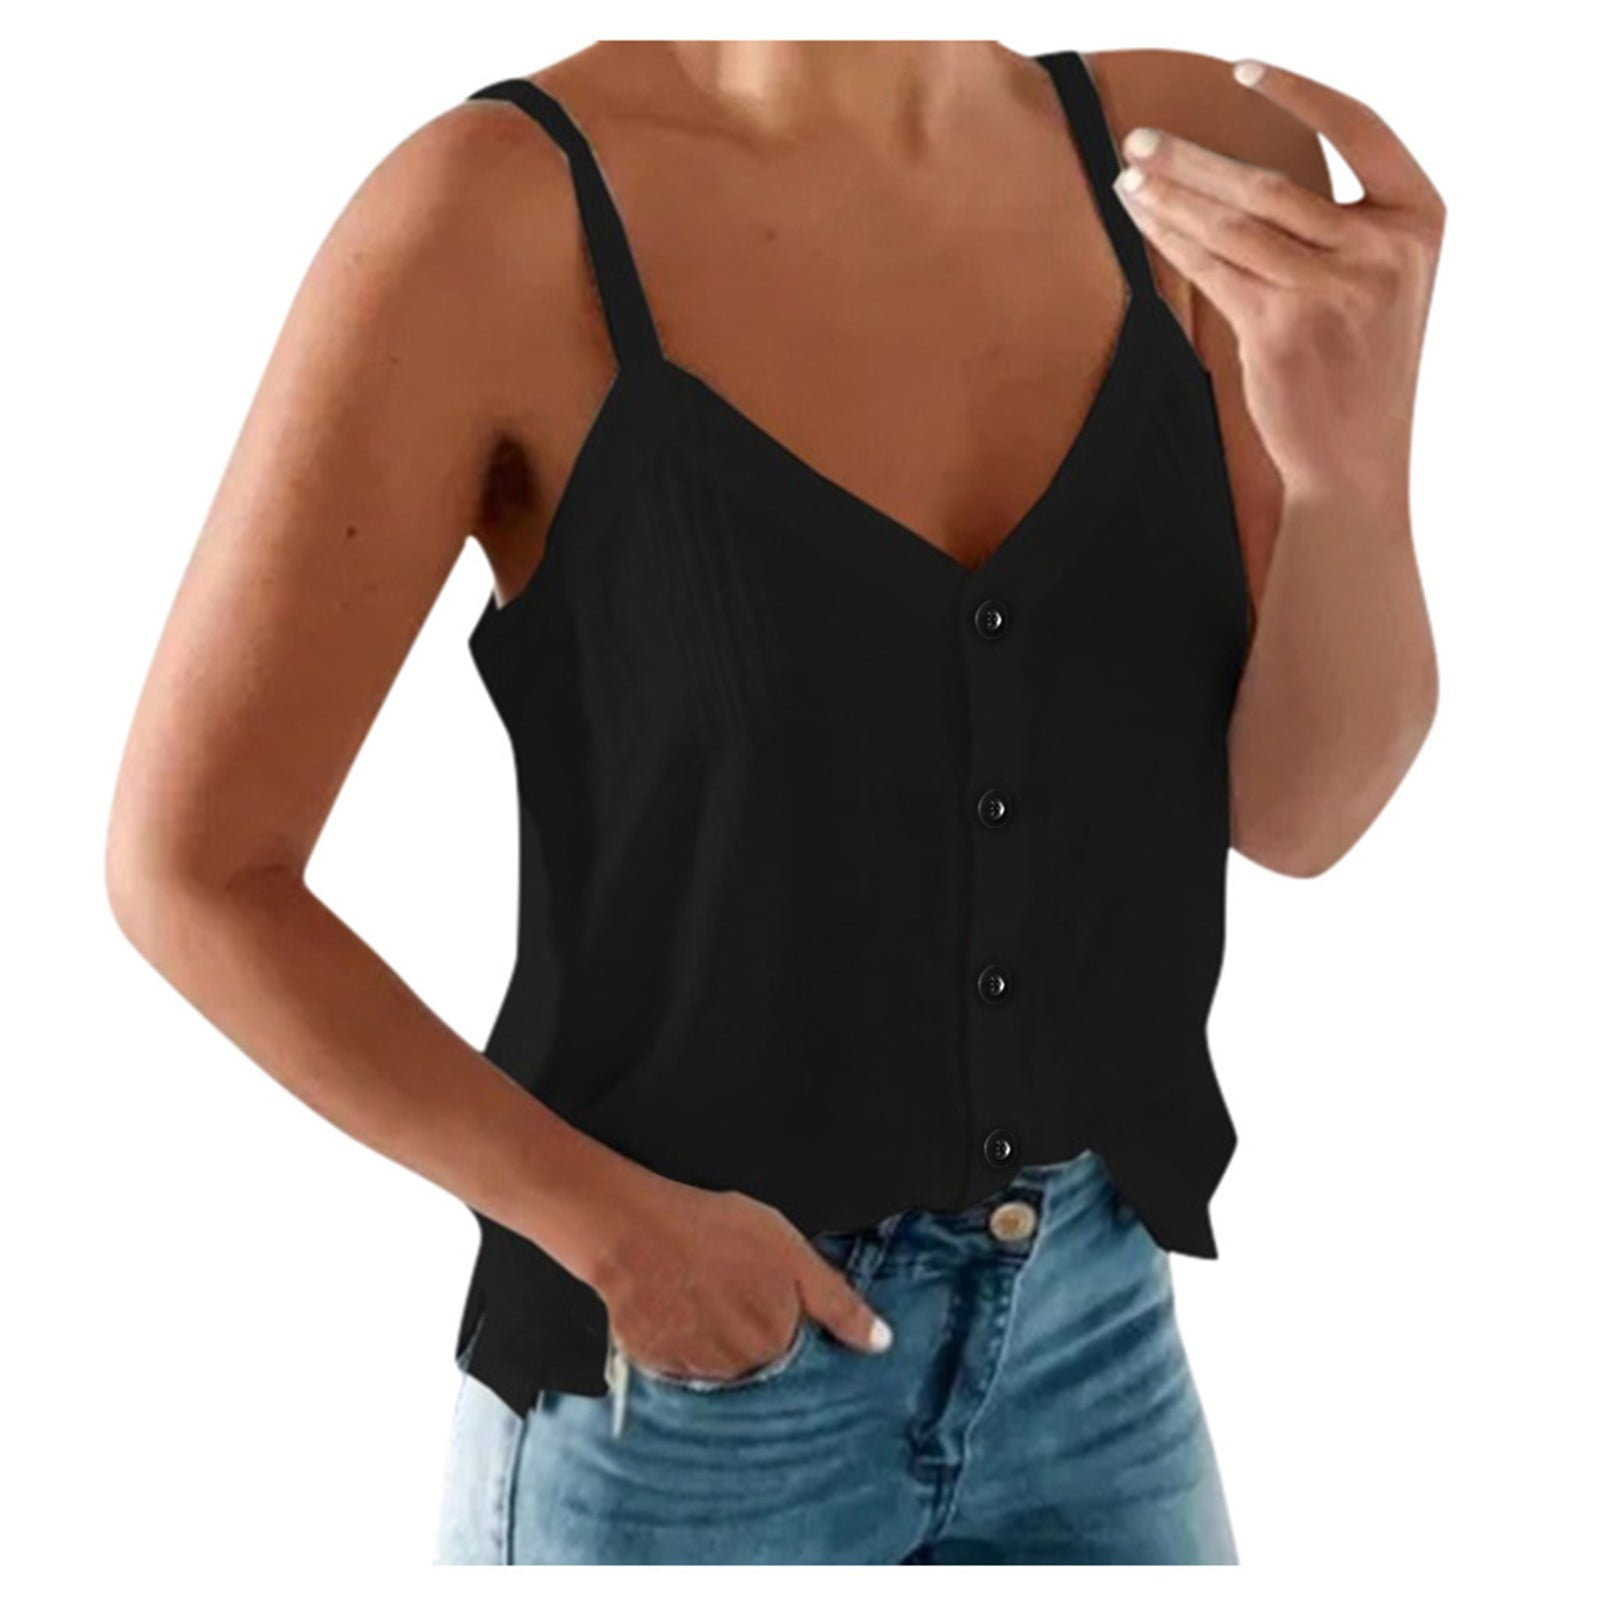 KaLI_store Tank Tops with Built In Bras Summer Tank Tops for Women